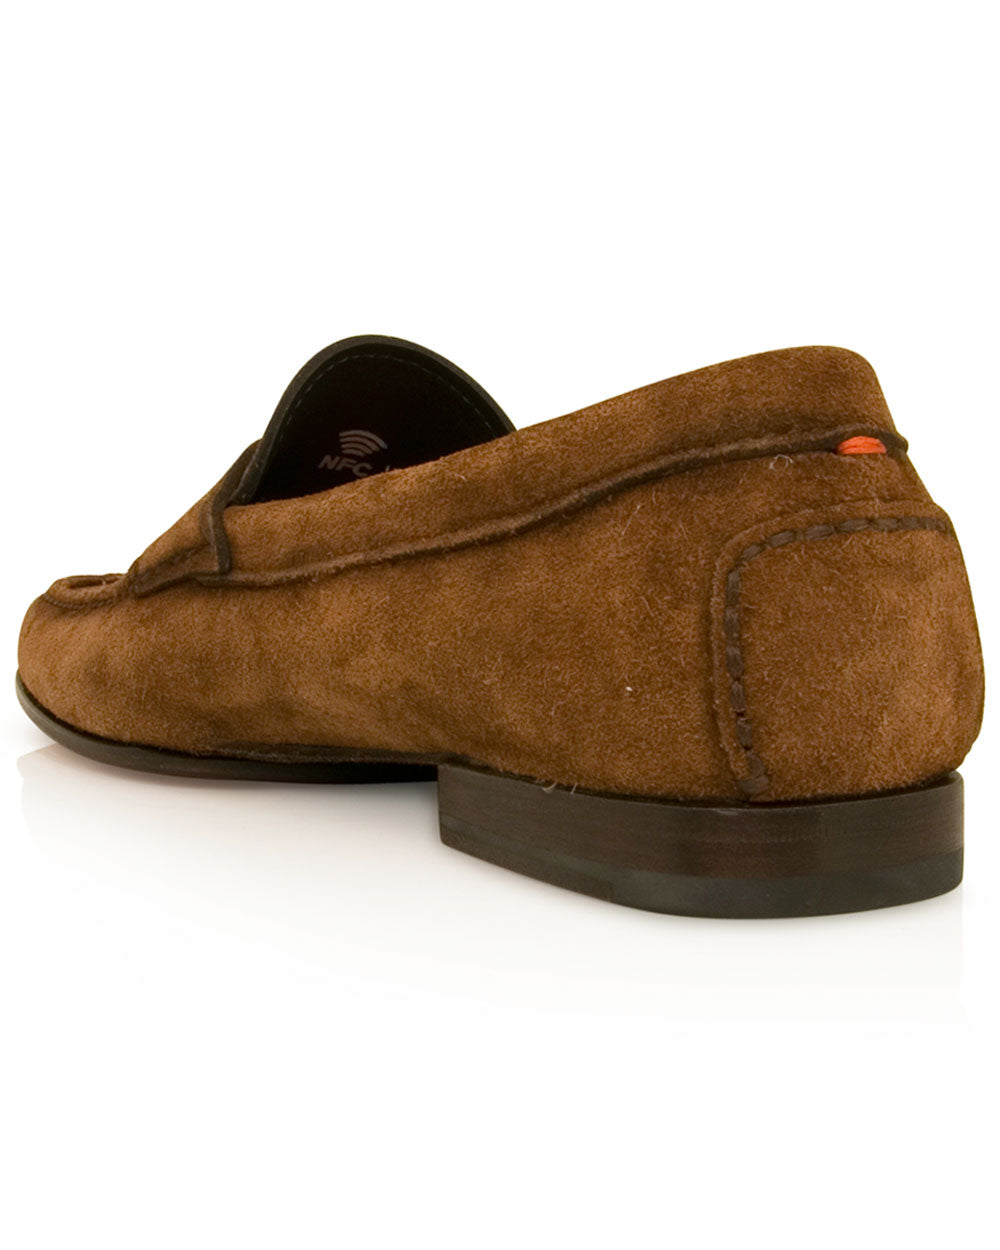 Dousing Suede Loafer in Brown